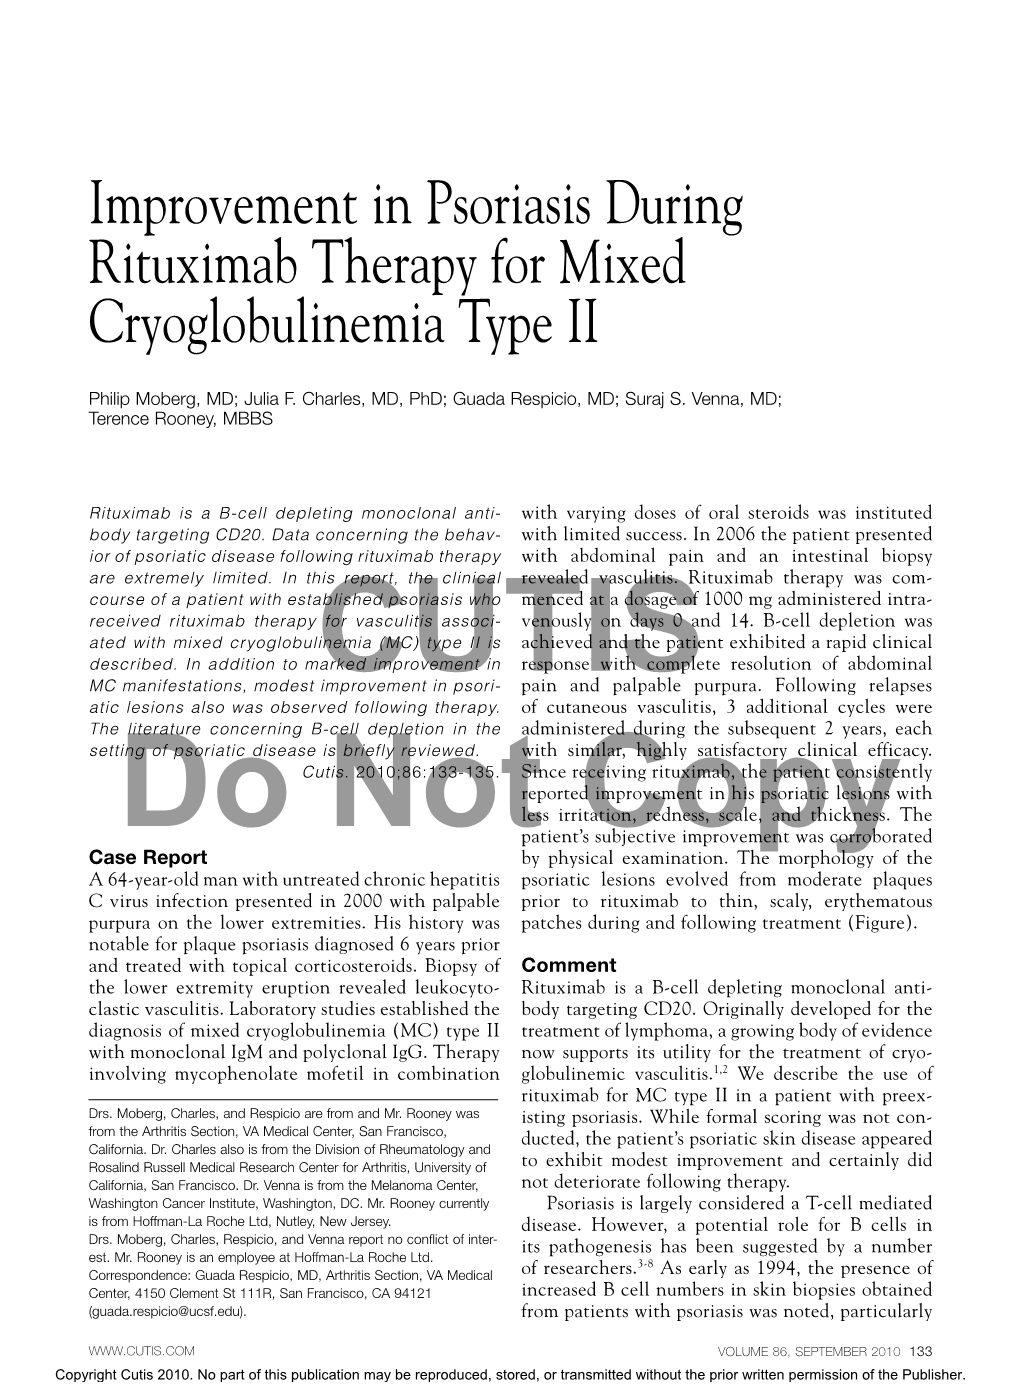 Improvement in Psoriasis During Rituximab Therapy for Mixed Cryoglobulinemia Type II